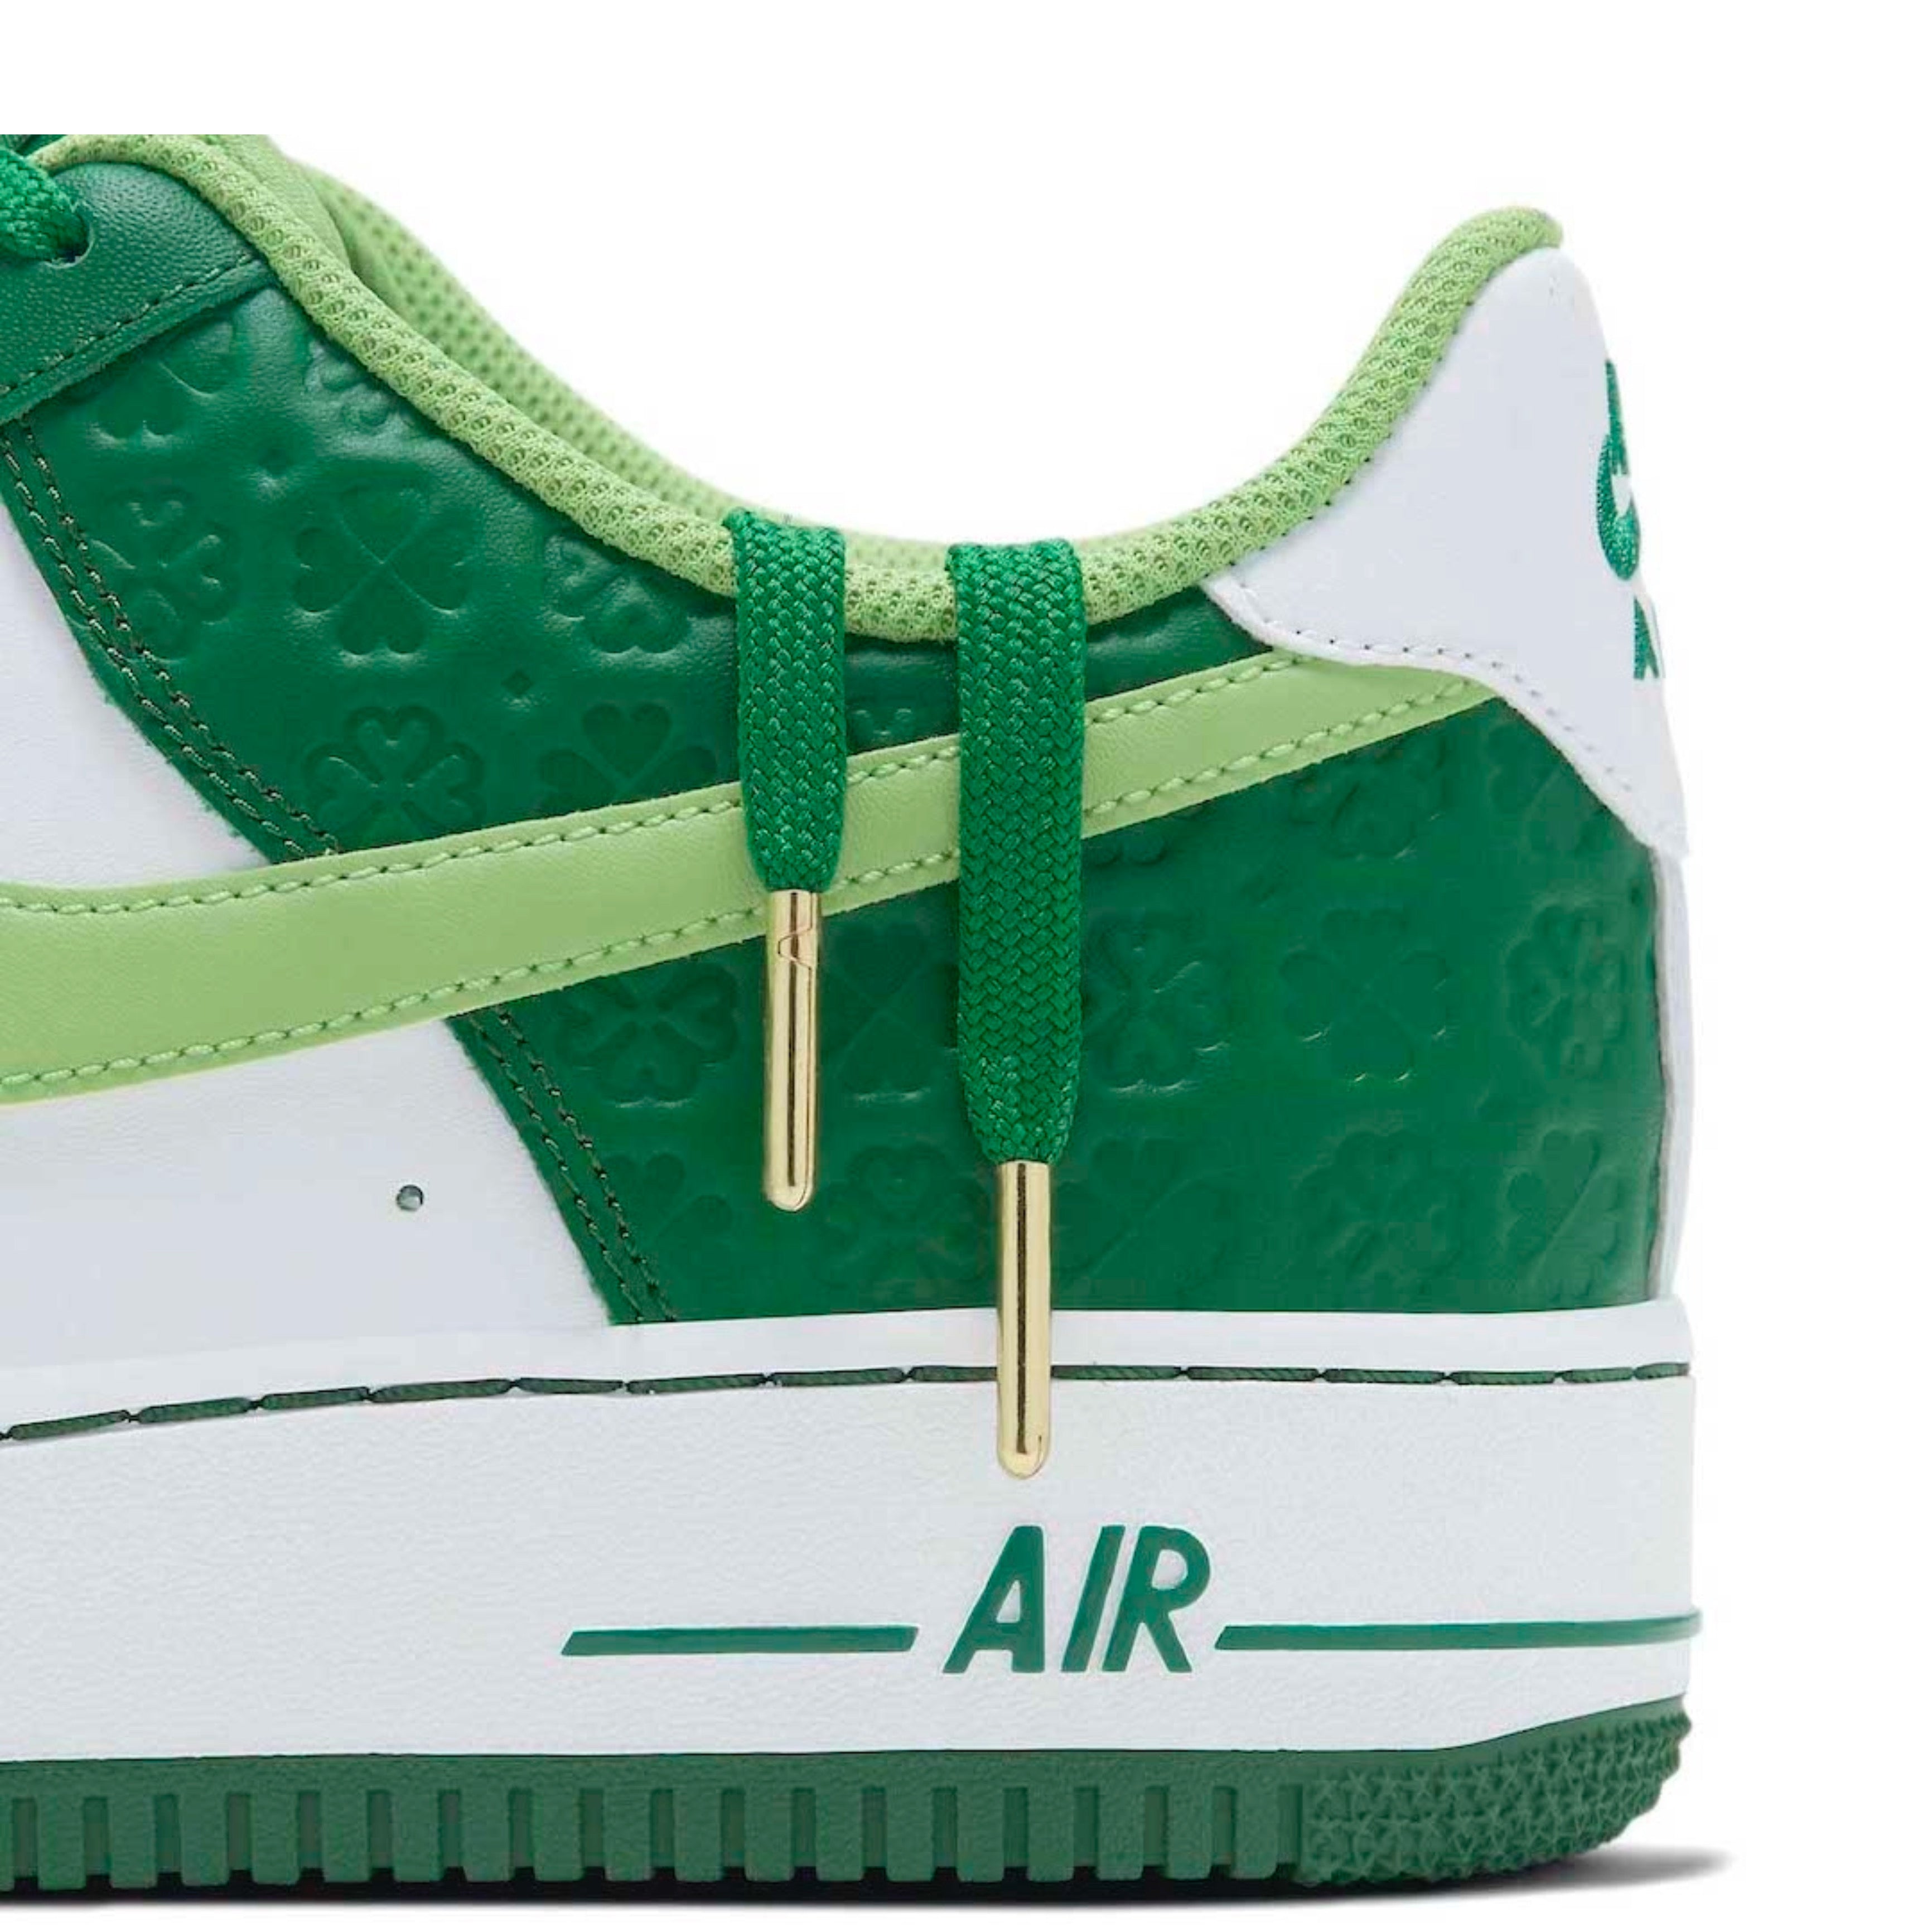 Nike airforce A1 lucky green shoes